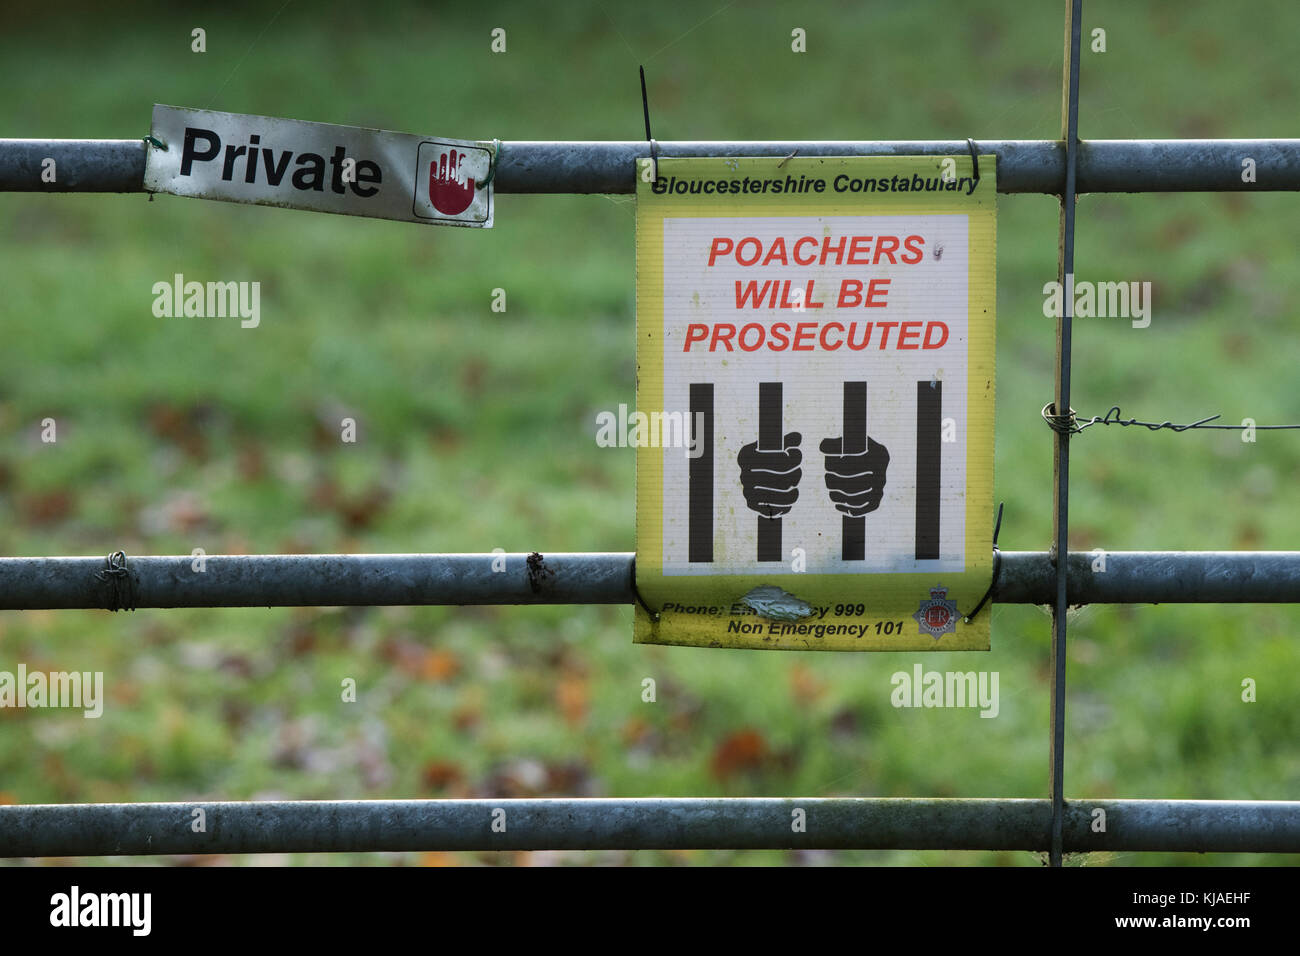 Private and Poachers will be prosecuted signs on a gate in the cotswold countryside. Cotswolds, Gloucestershire, England Stock Photo